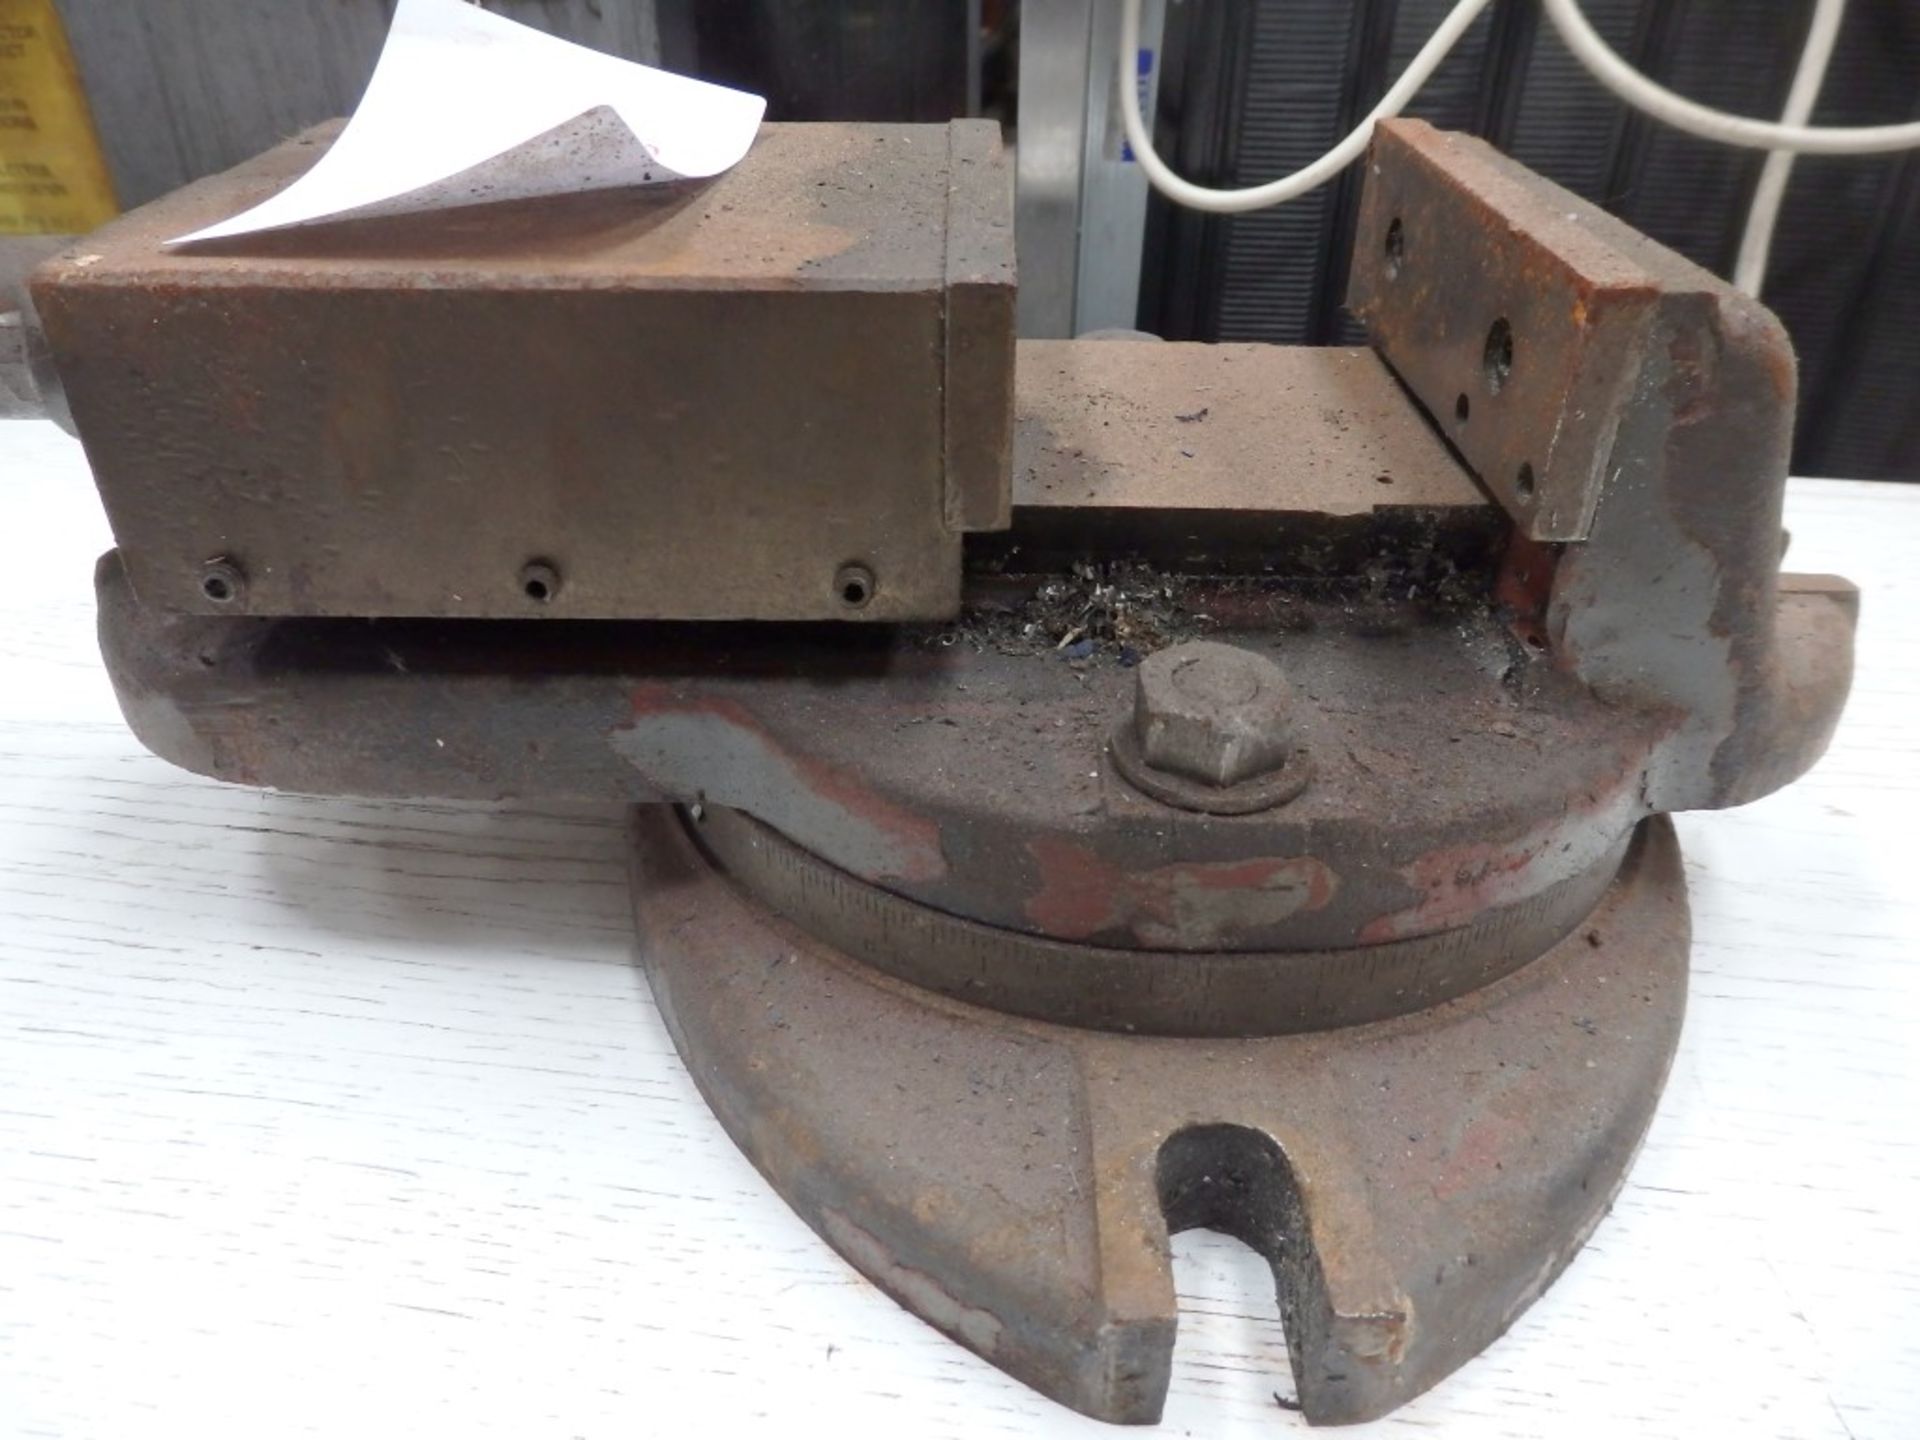 1 x Machine Vice - Perfect For Precise Workholding - Used - Ref WPM066/574 - CL057 - Location: